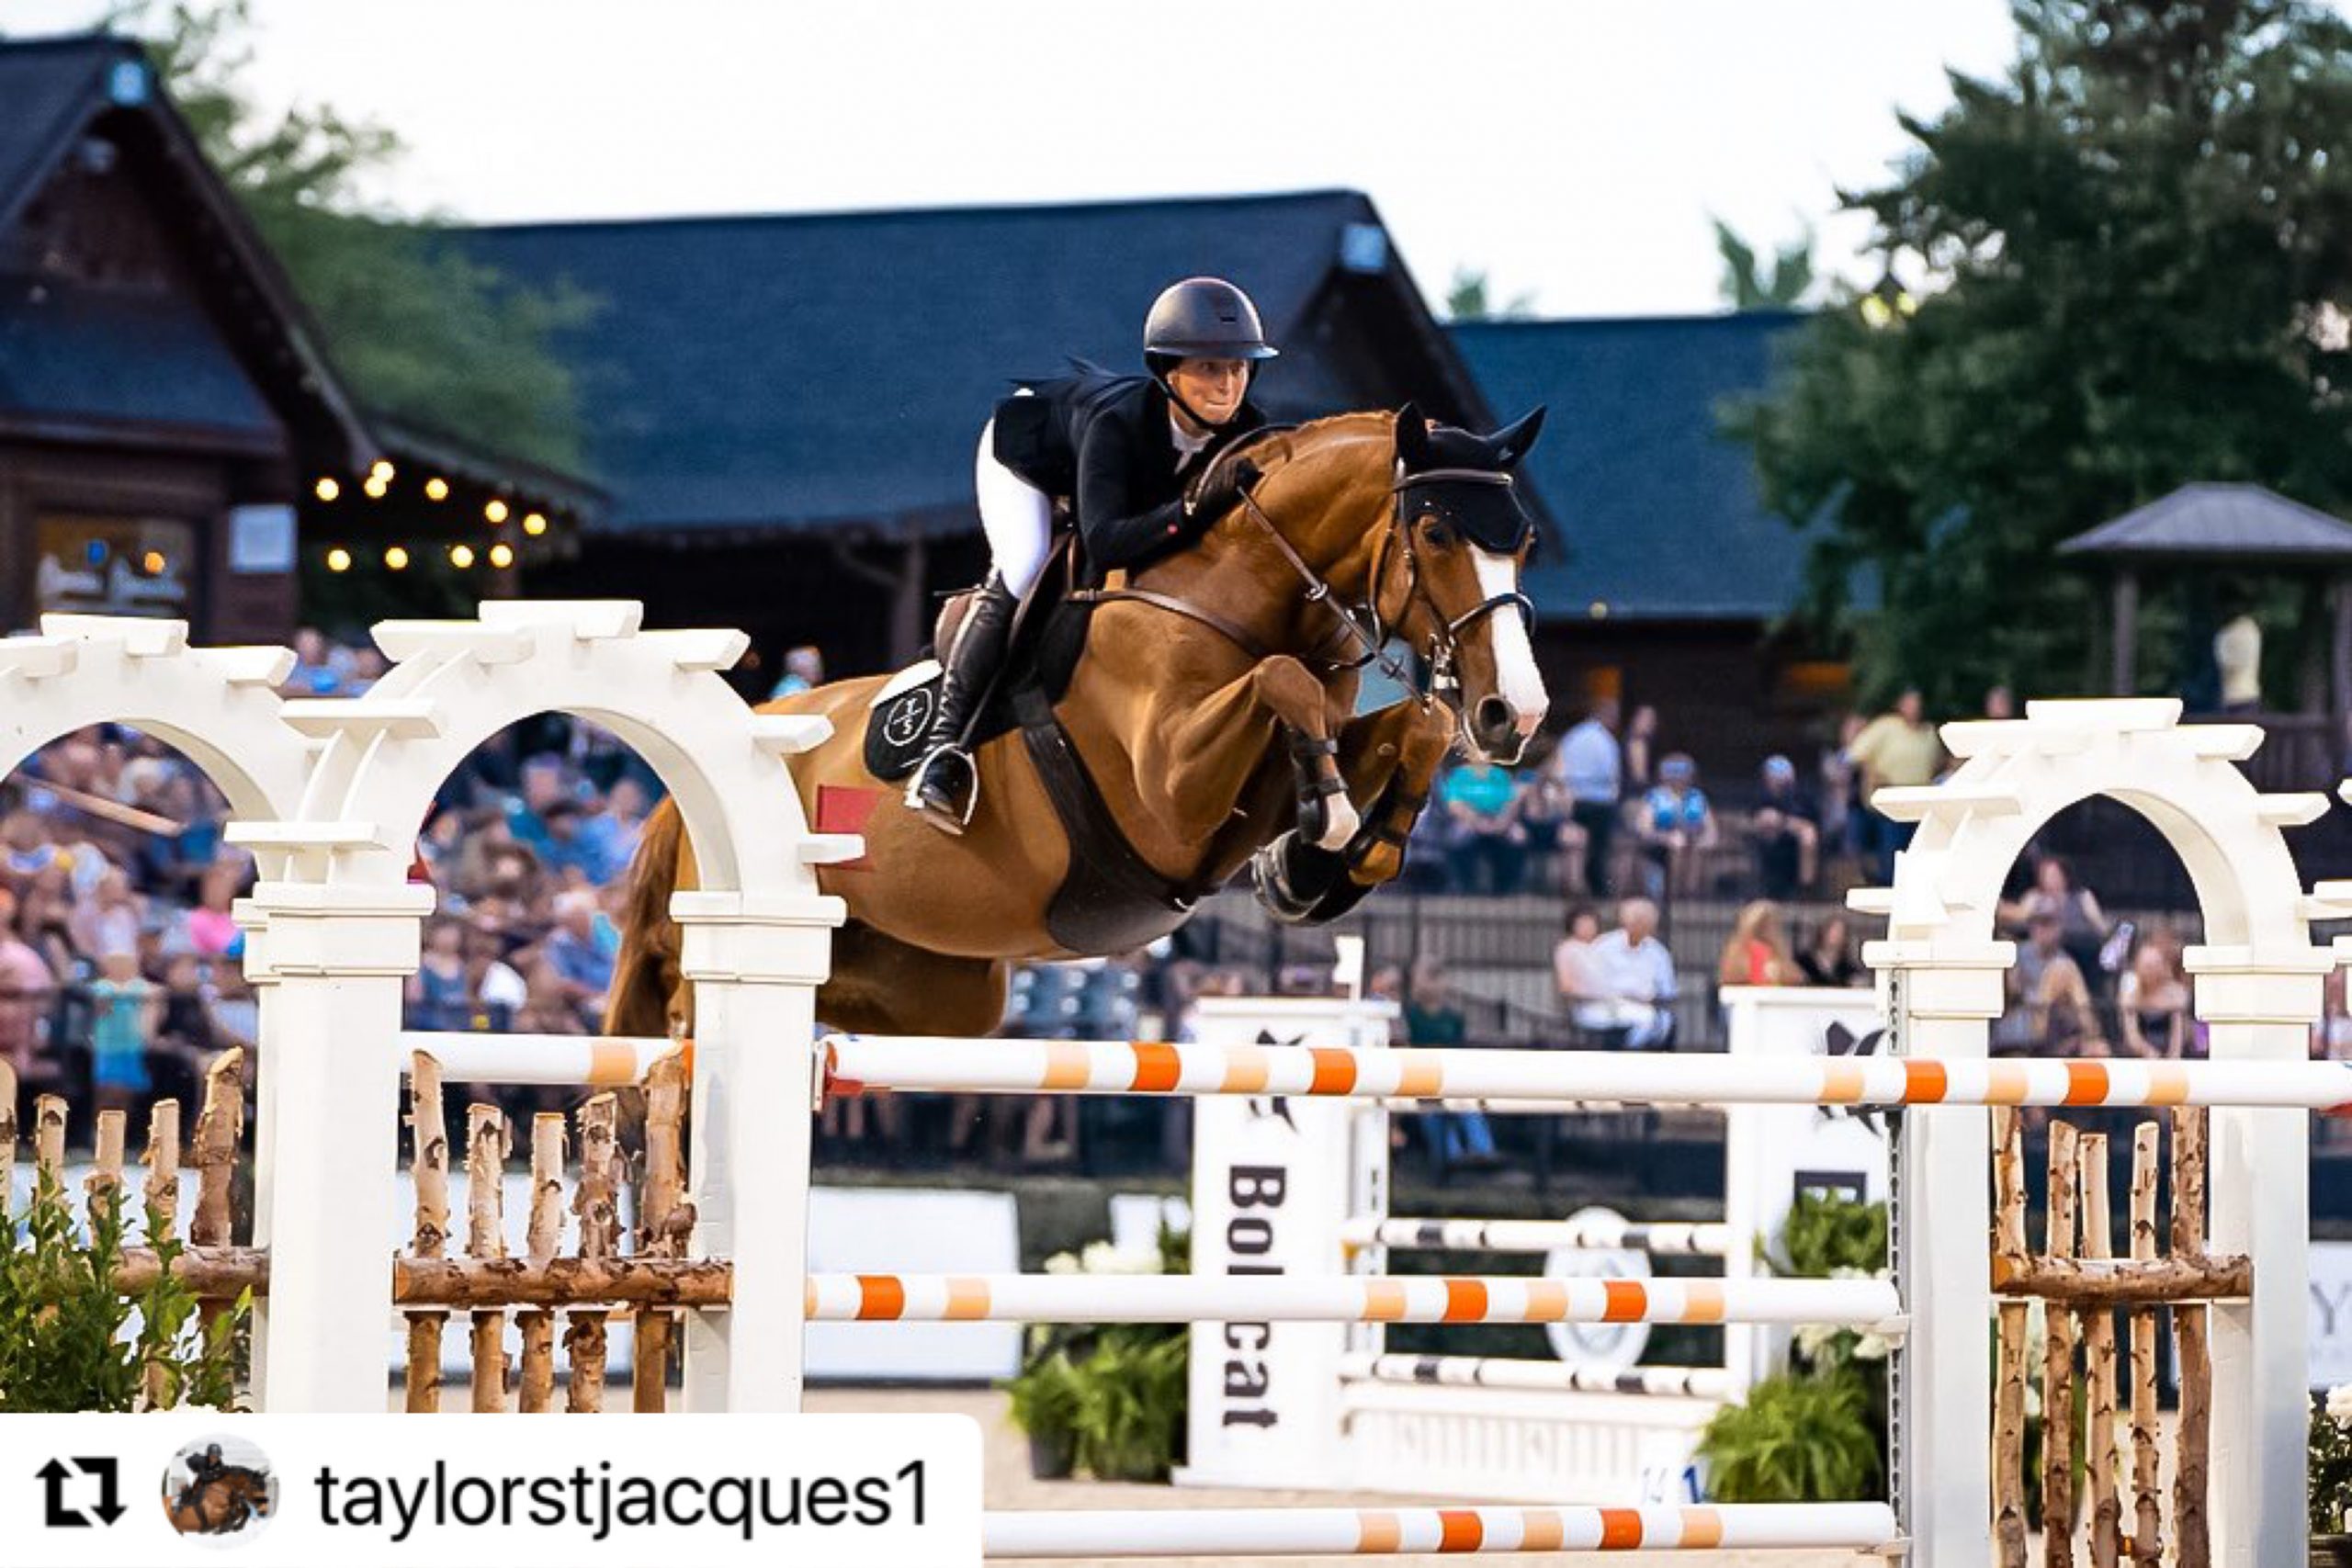 Reference Jakilly takes the 2nd place in the CSI3* 1.50m Qualifier! Congratulations!